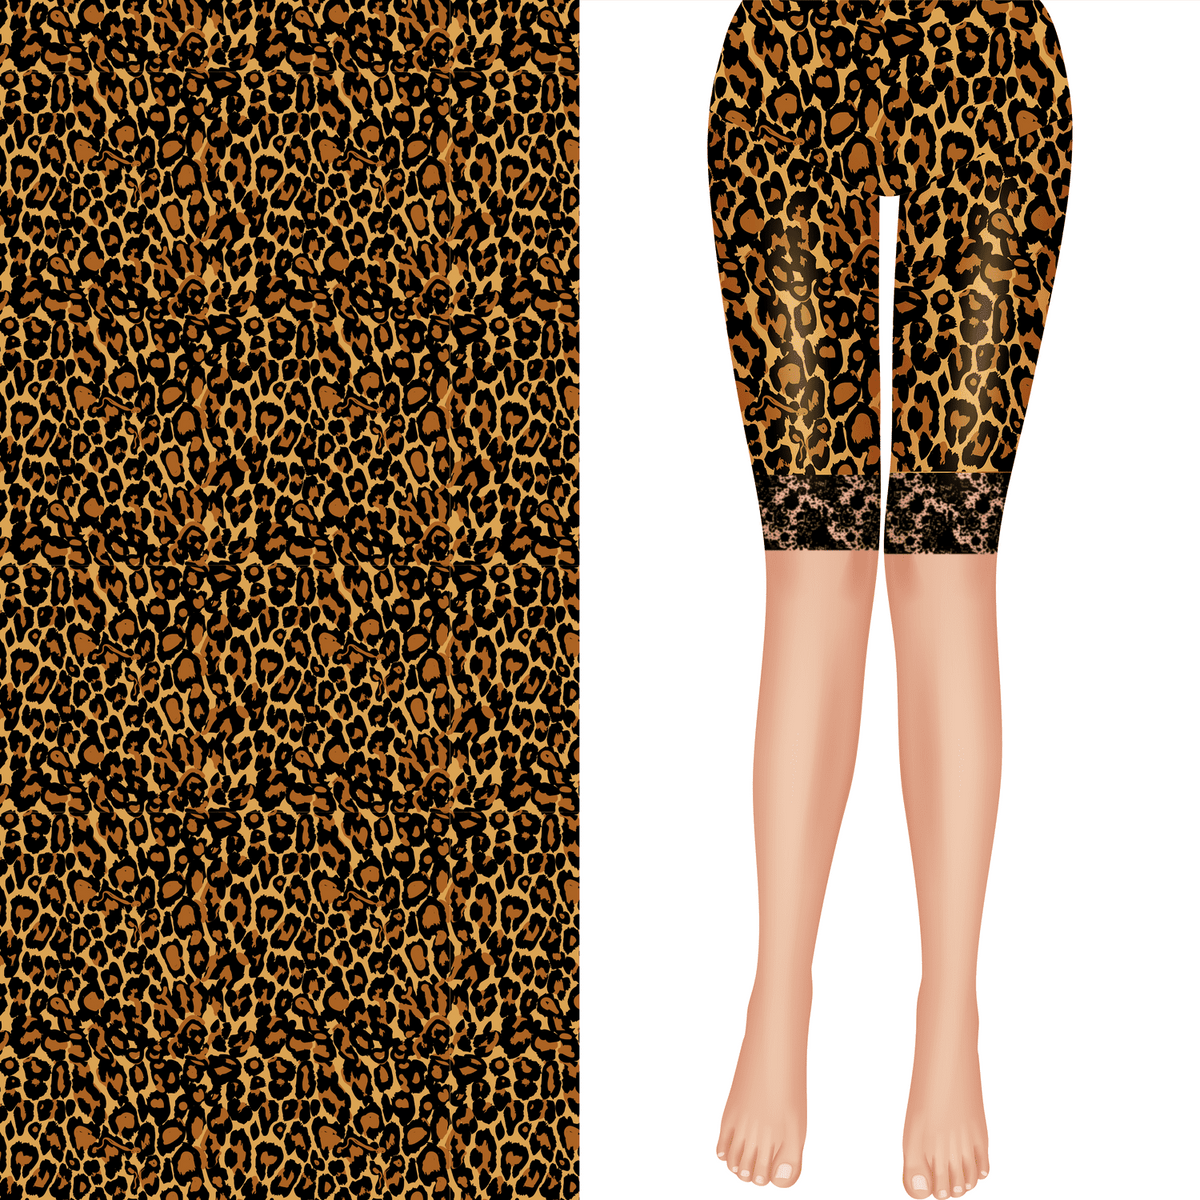 Leopard Print Shorts with Black Lace Trim with Pockets